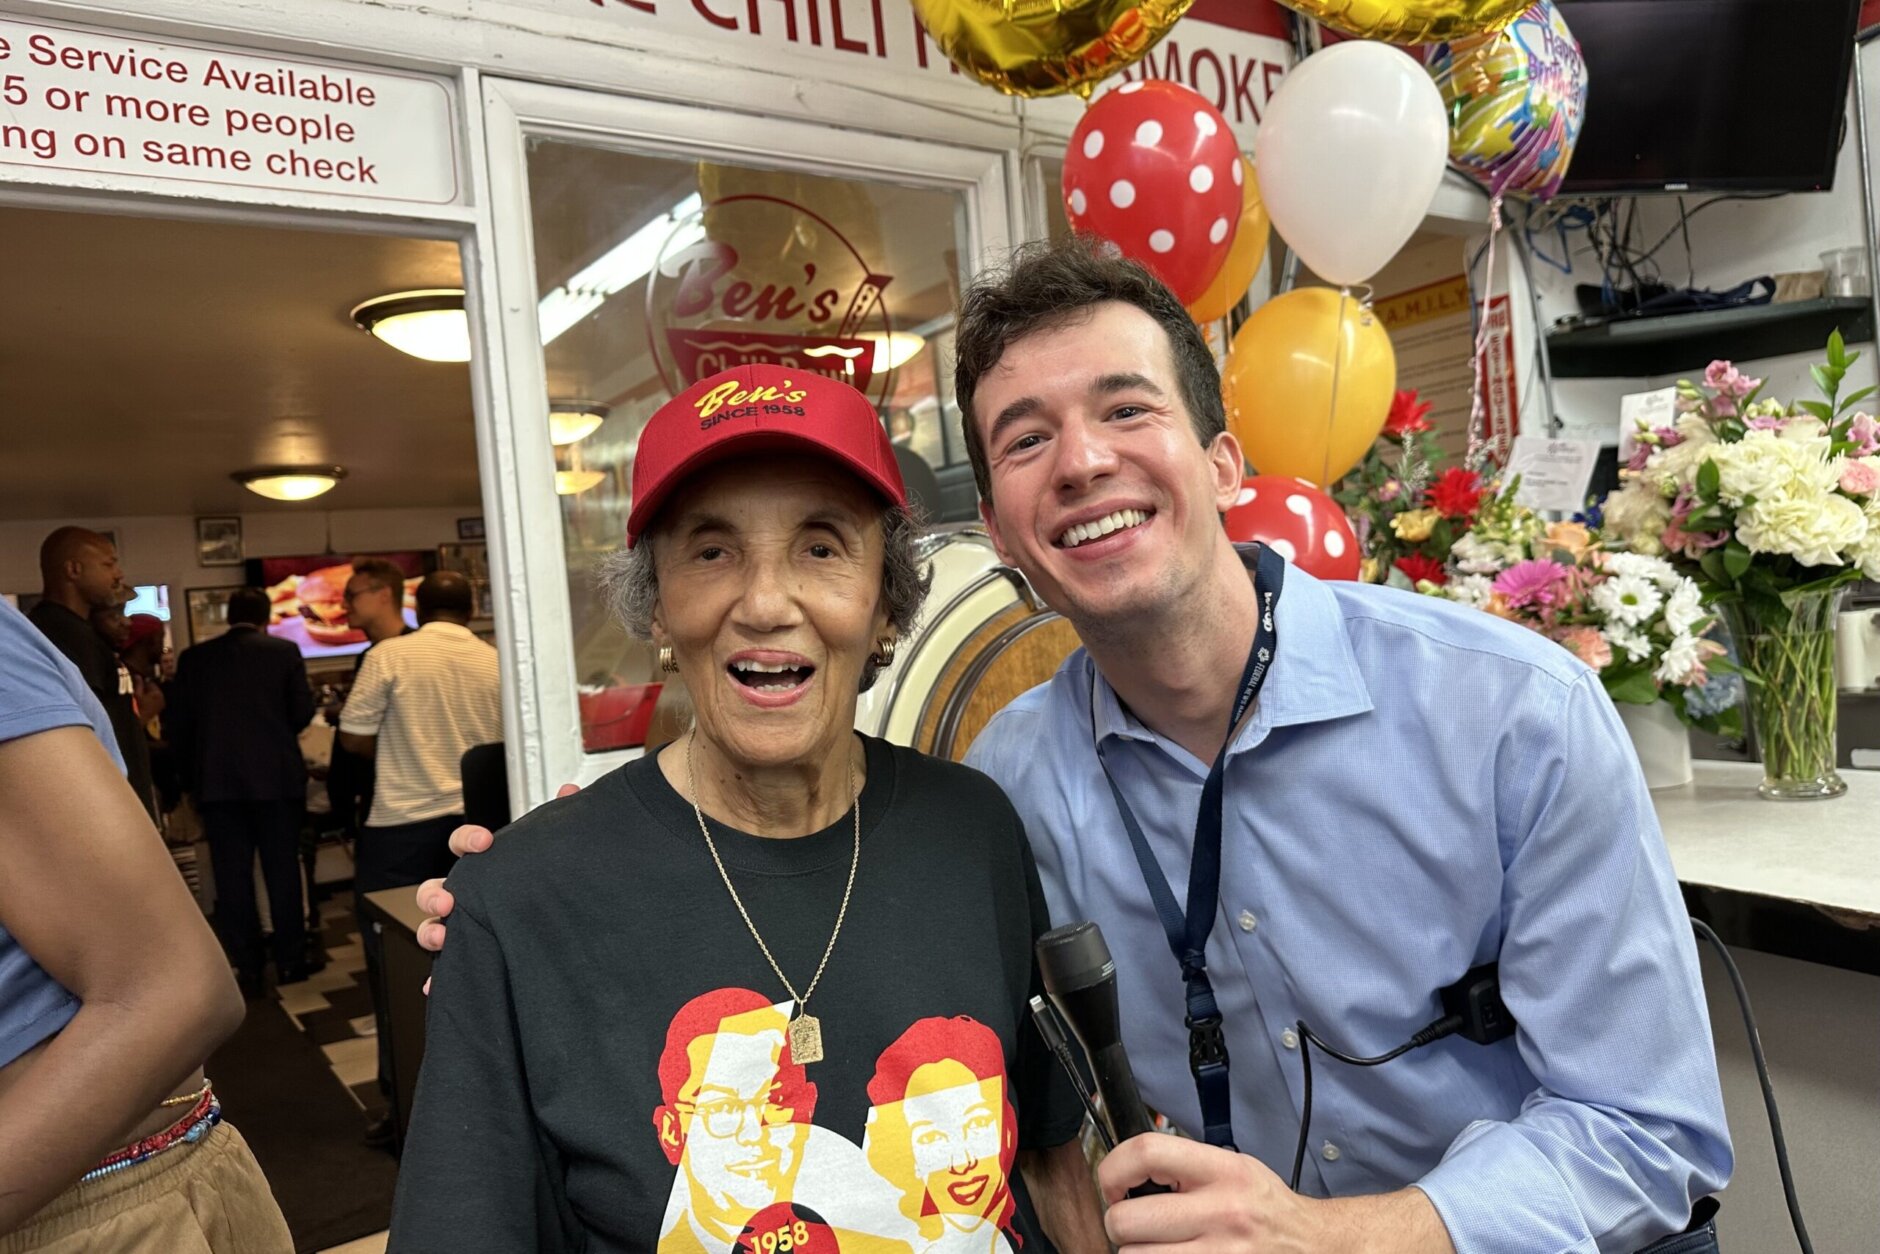 <p>The constant refrain Tuesday was &#8220;65 years more!&#8221; with Ali saying her business isn’t slowing down anytime soon, even if she might need a breather.</p>
